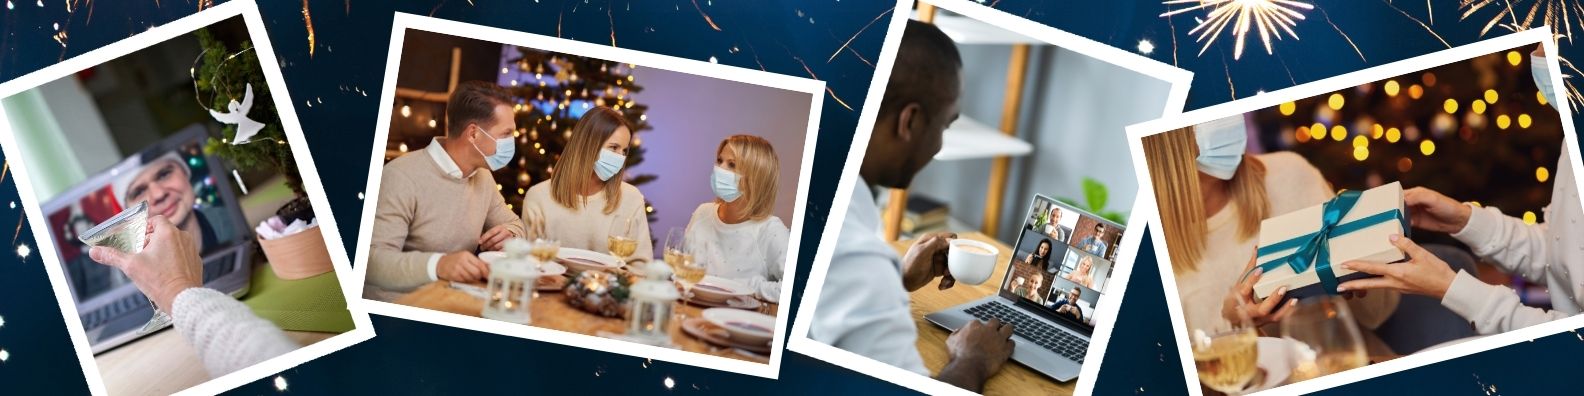 staying safe during company holiday parties